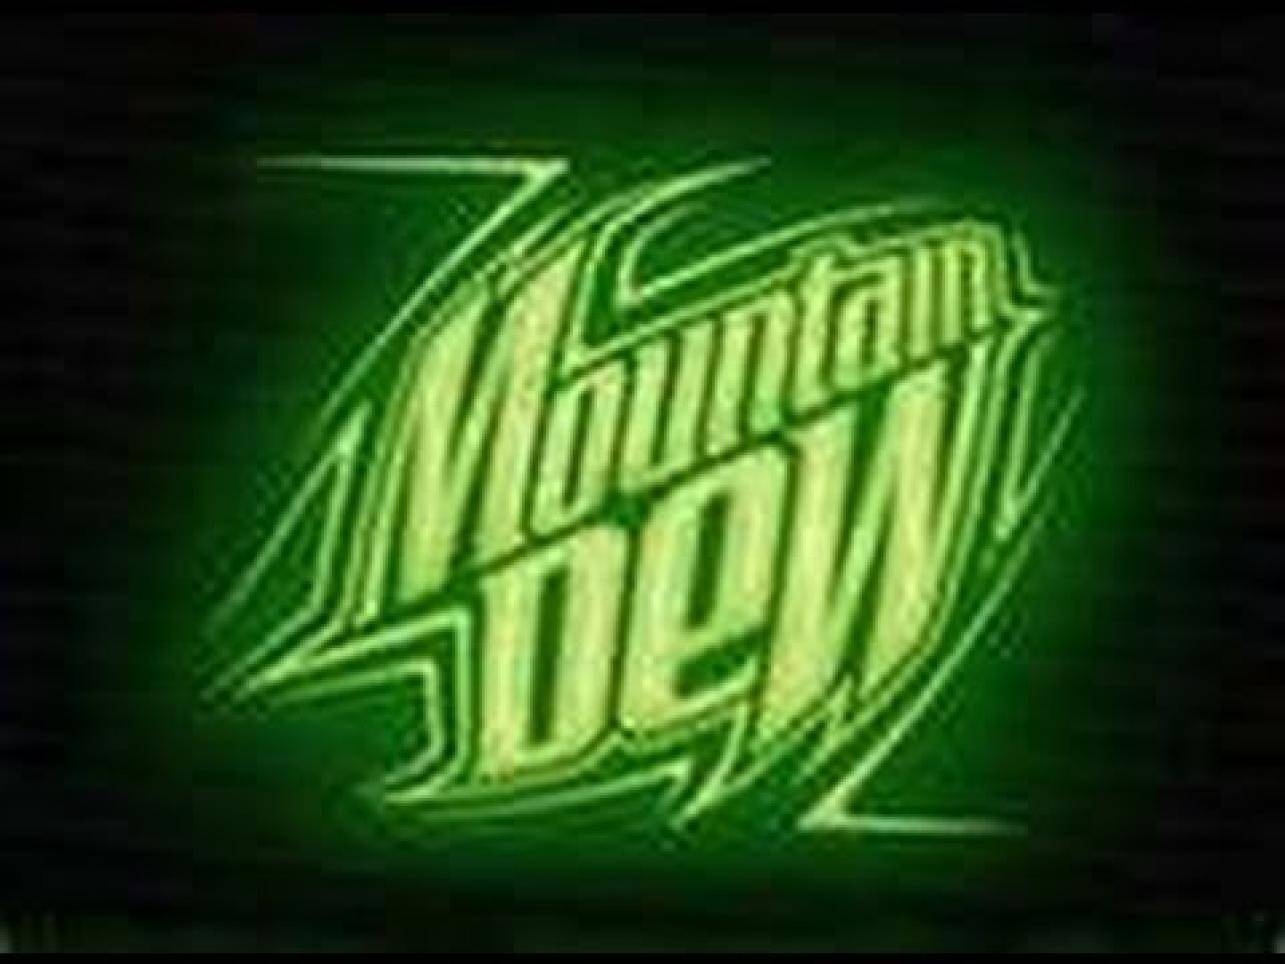 Mtn Dew Wallpaper Image In Collection